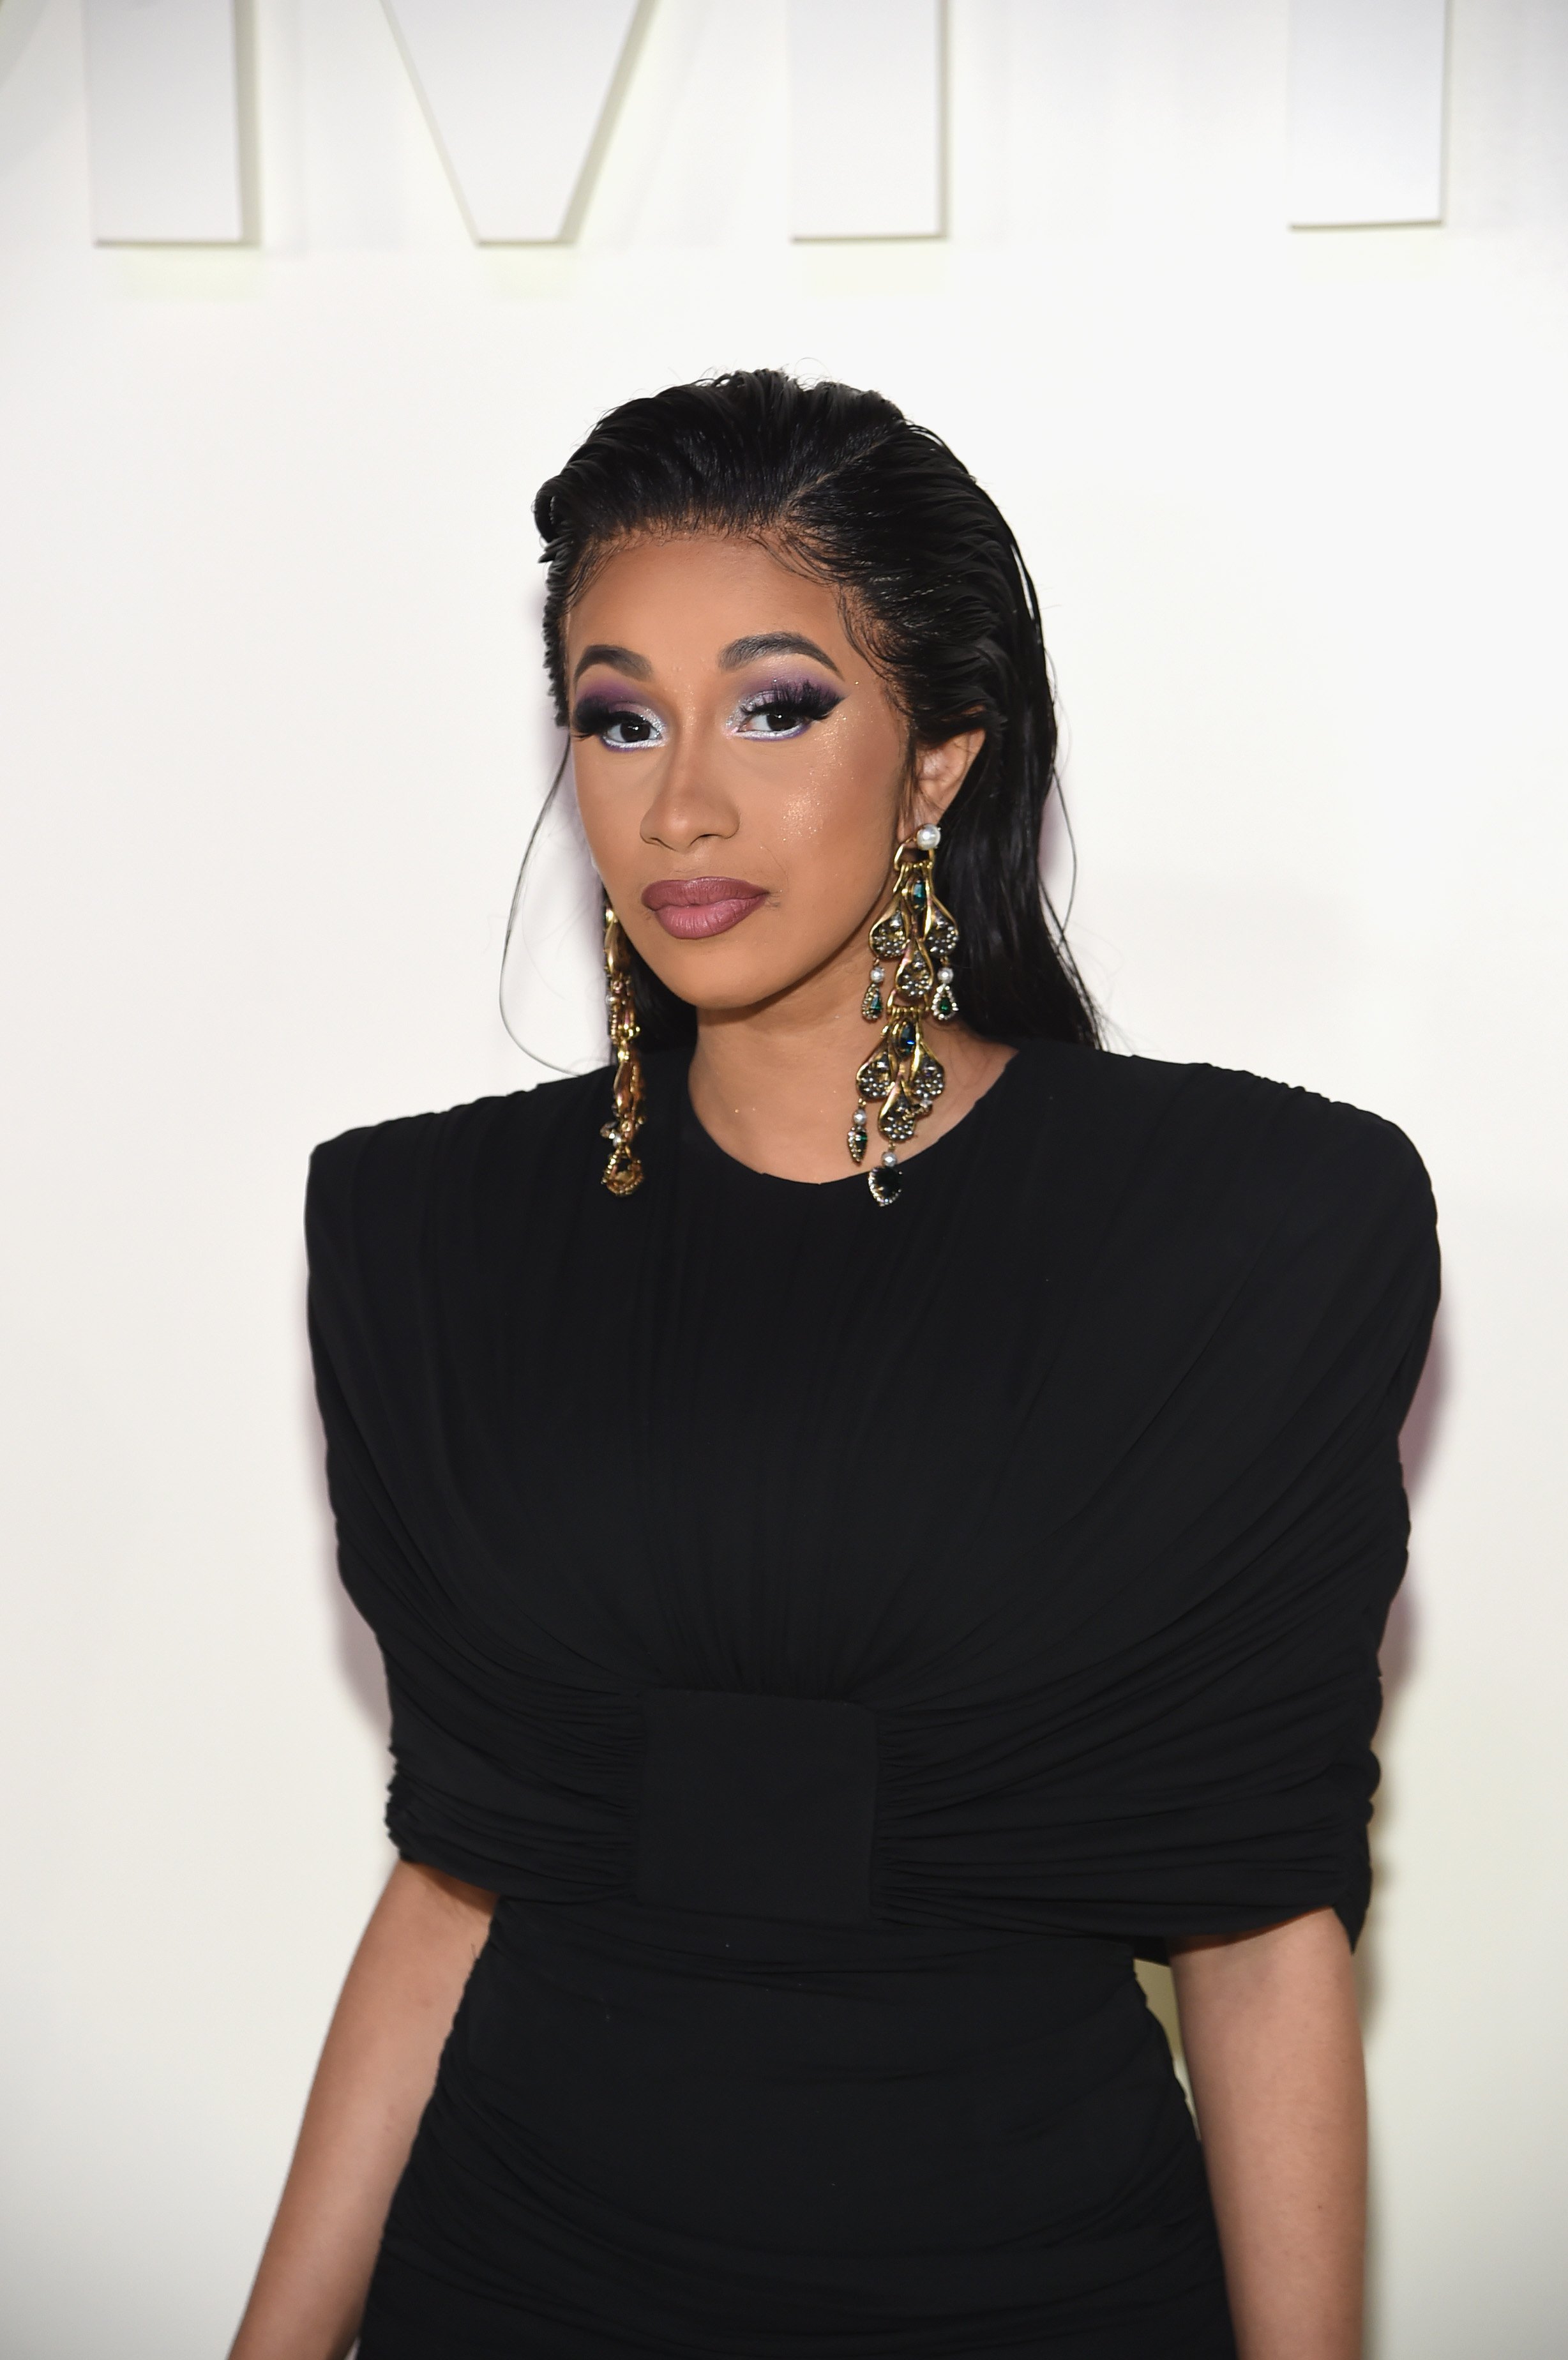 Cardi B attends the Tom Ford Fashion Show in New York City on September 5, 2018 | Photo: Getty Images